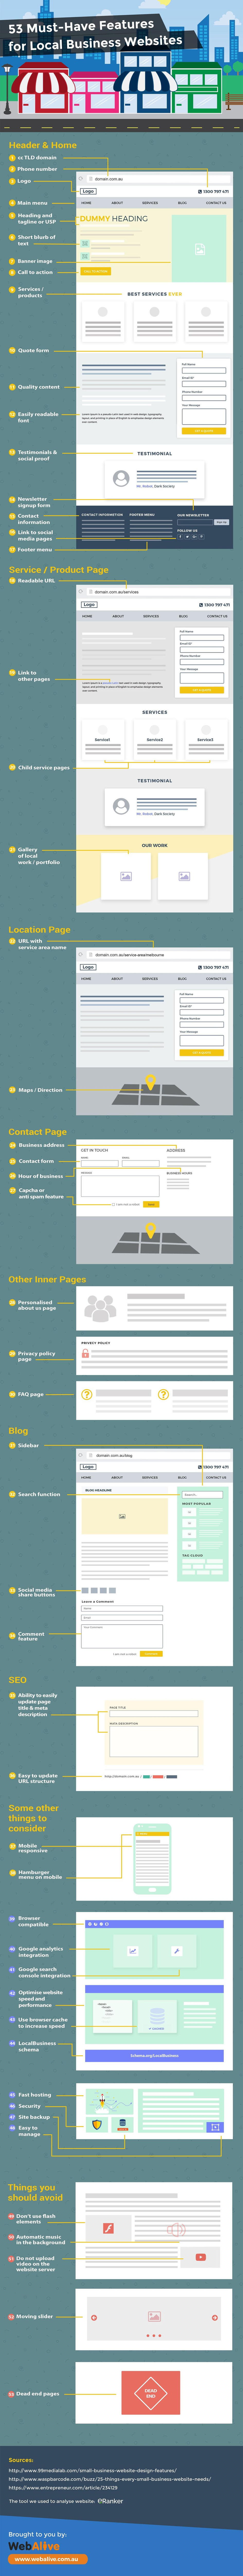 website-features-for-local-business-websites-infographic-1